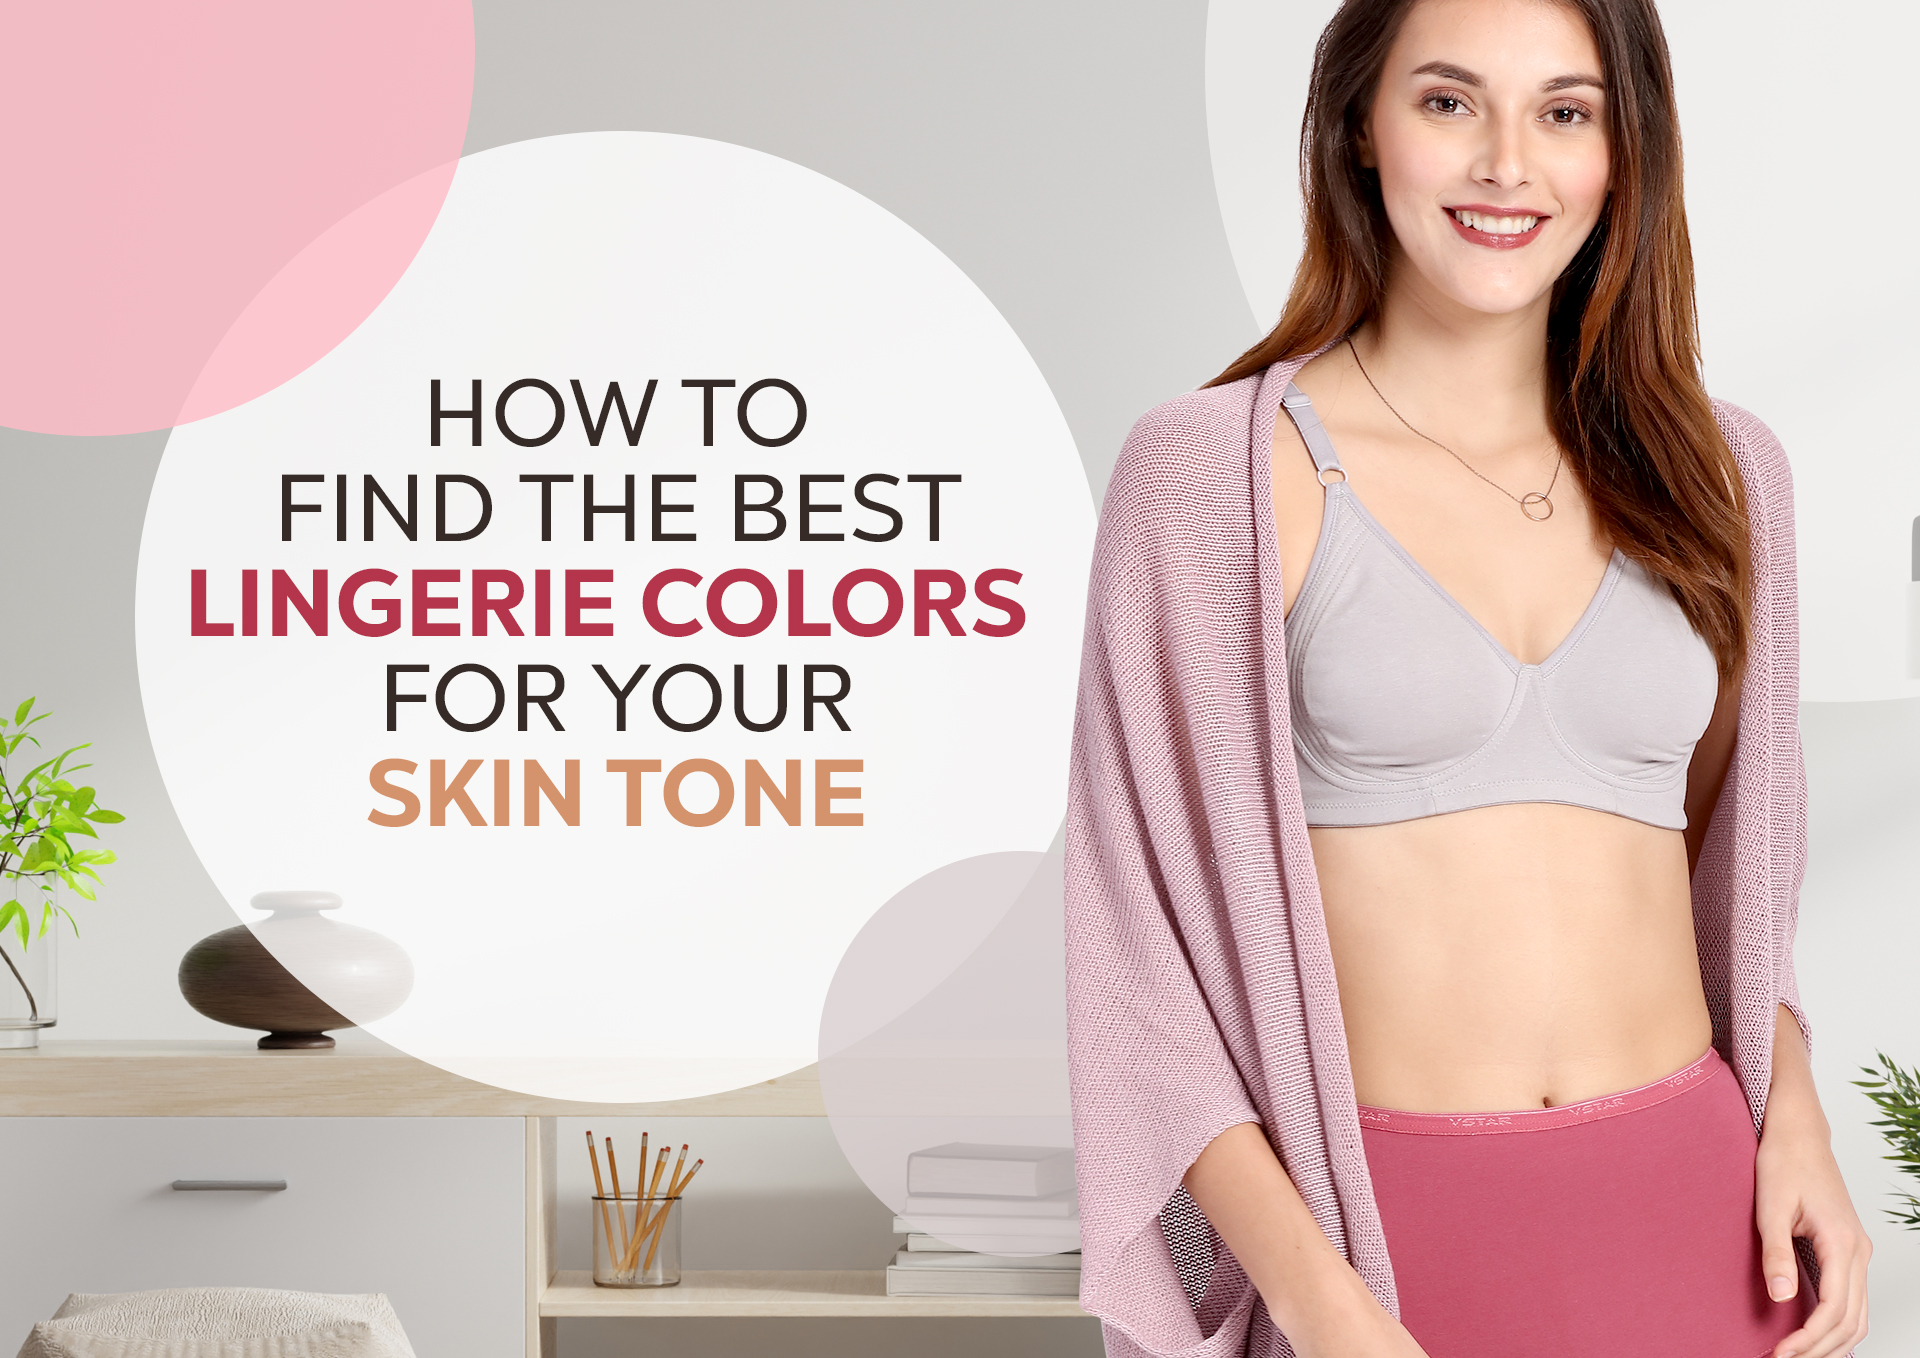 How to Pick the Perfect Lingerie Colour to Complement Your Skin